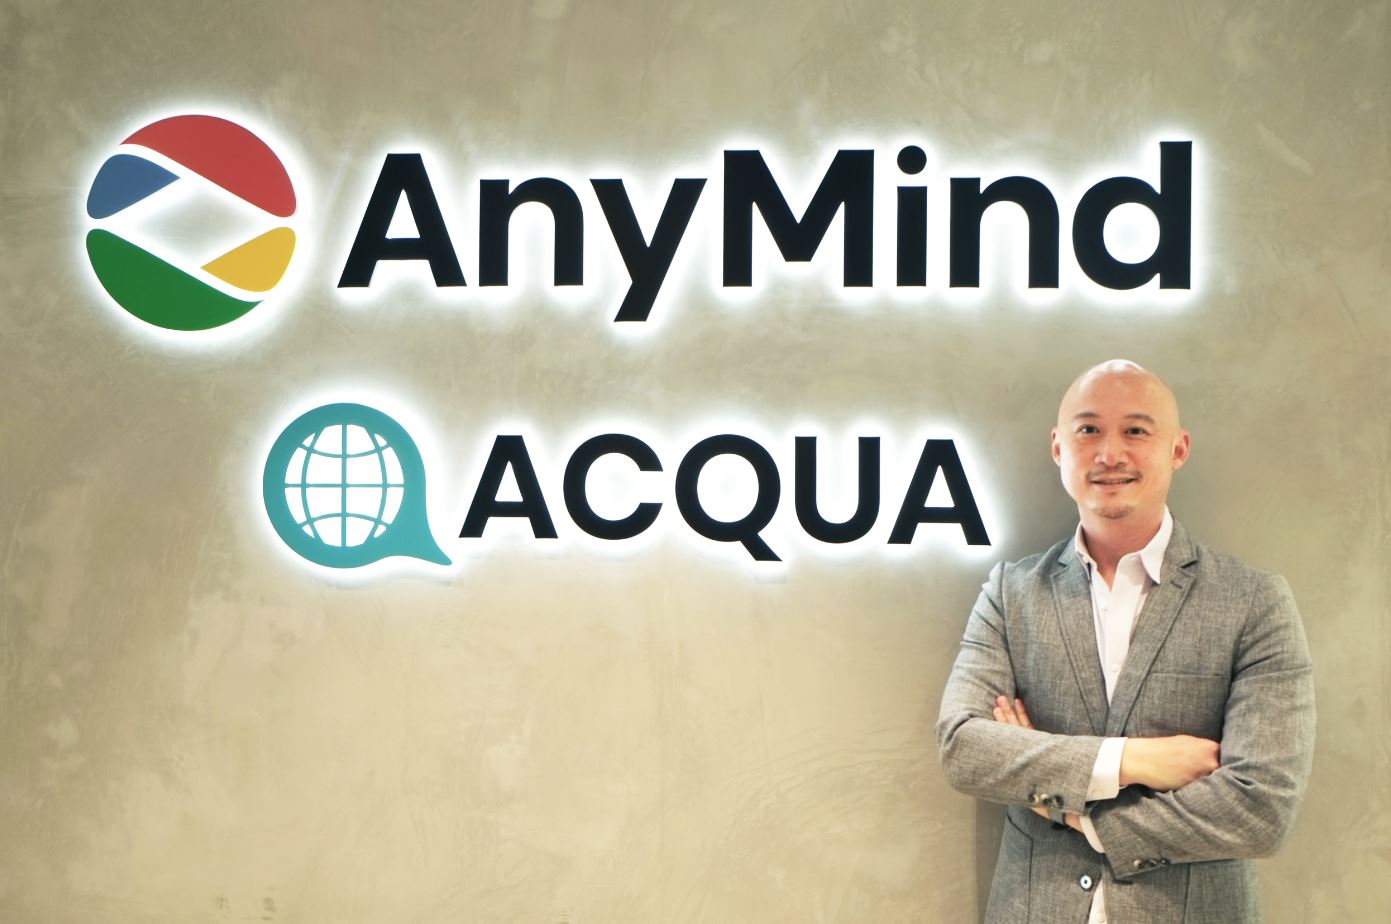 Commerce Enablement Company AnyMind Group Looks to Drive Potential Growth in Hong Kong and the GBA